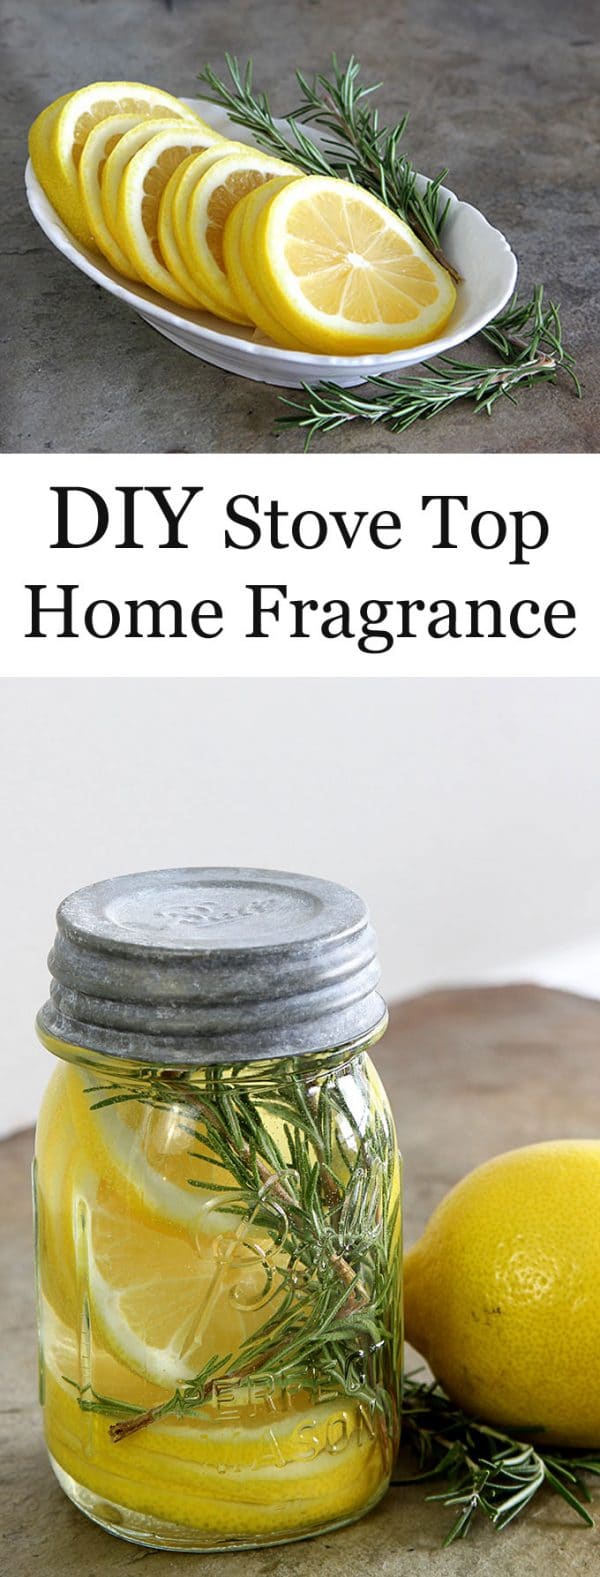 DIY Stove Top Home Fragrance - House of Hawthornes